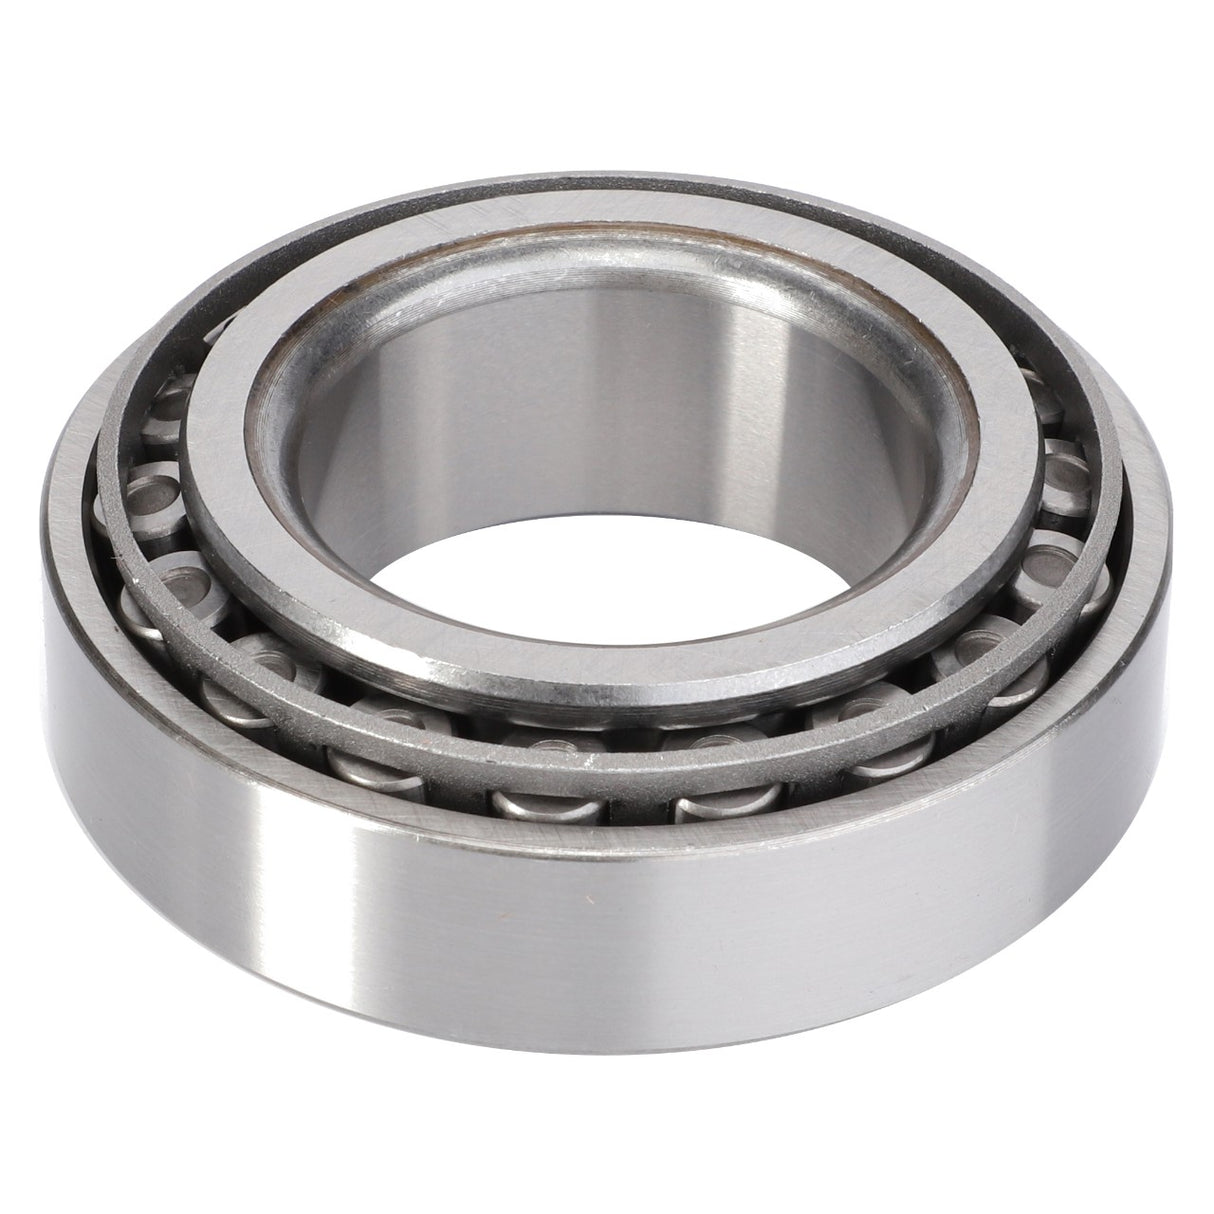 AGCO | Taper Roller Bearing - 893375M91 - Farming Parts